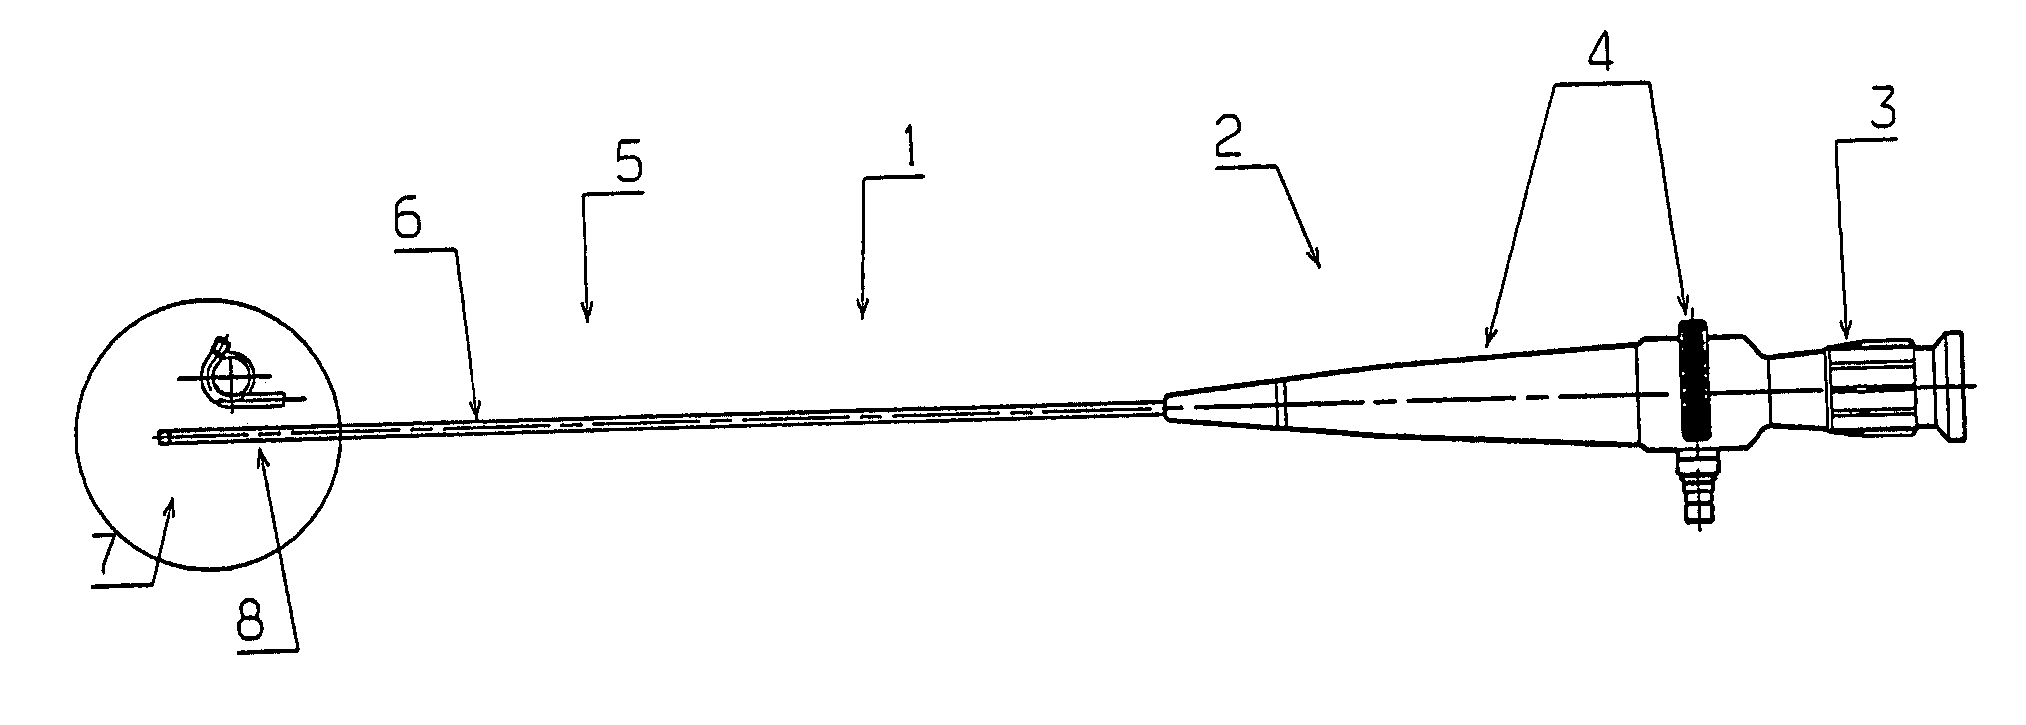 Bendable portion of an insertion tube of an endoscope and method of producing it